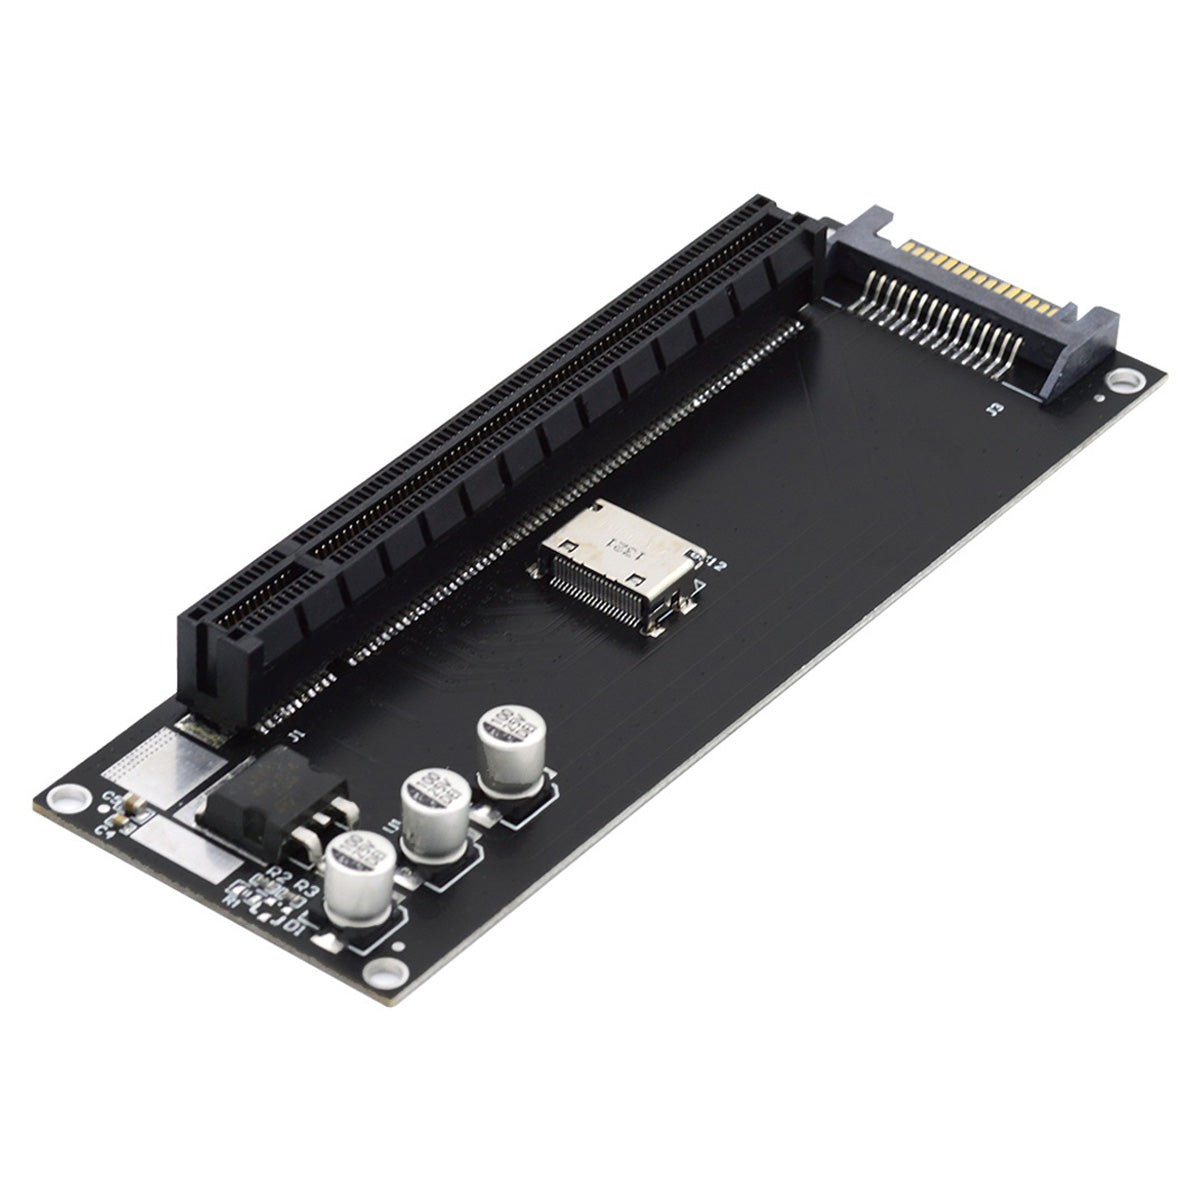 Oculink SFF-8612 SFF-8611 to PCIE PCI-Express 16x 4x Adapter with SATA Power Port for Mainboard